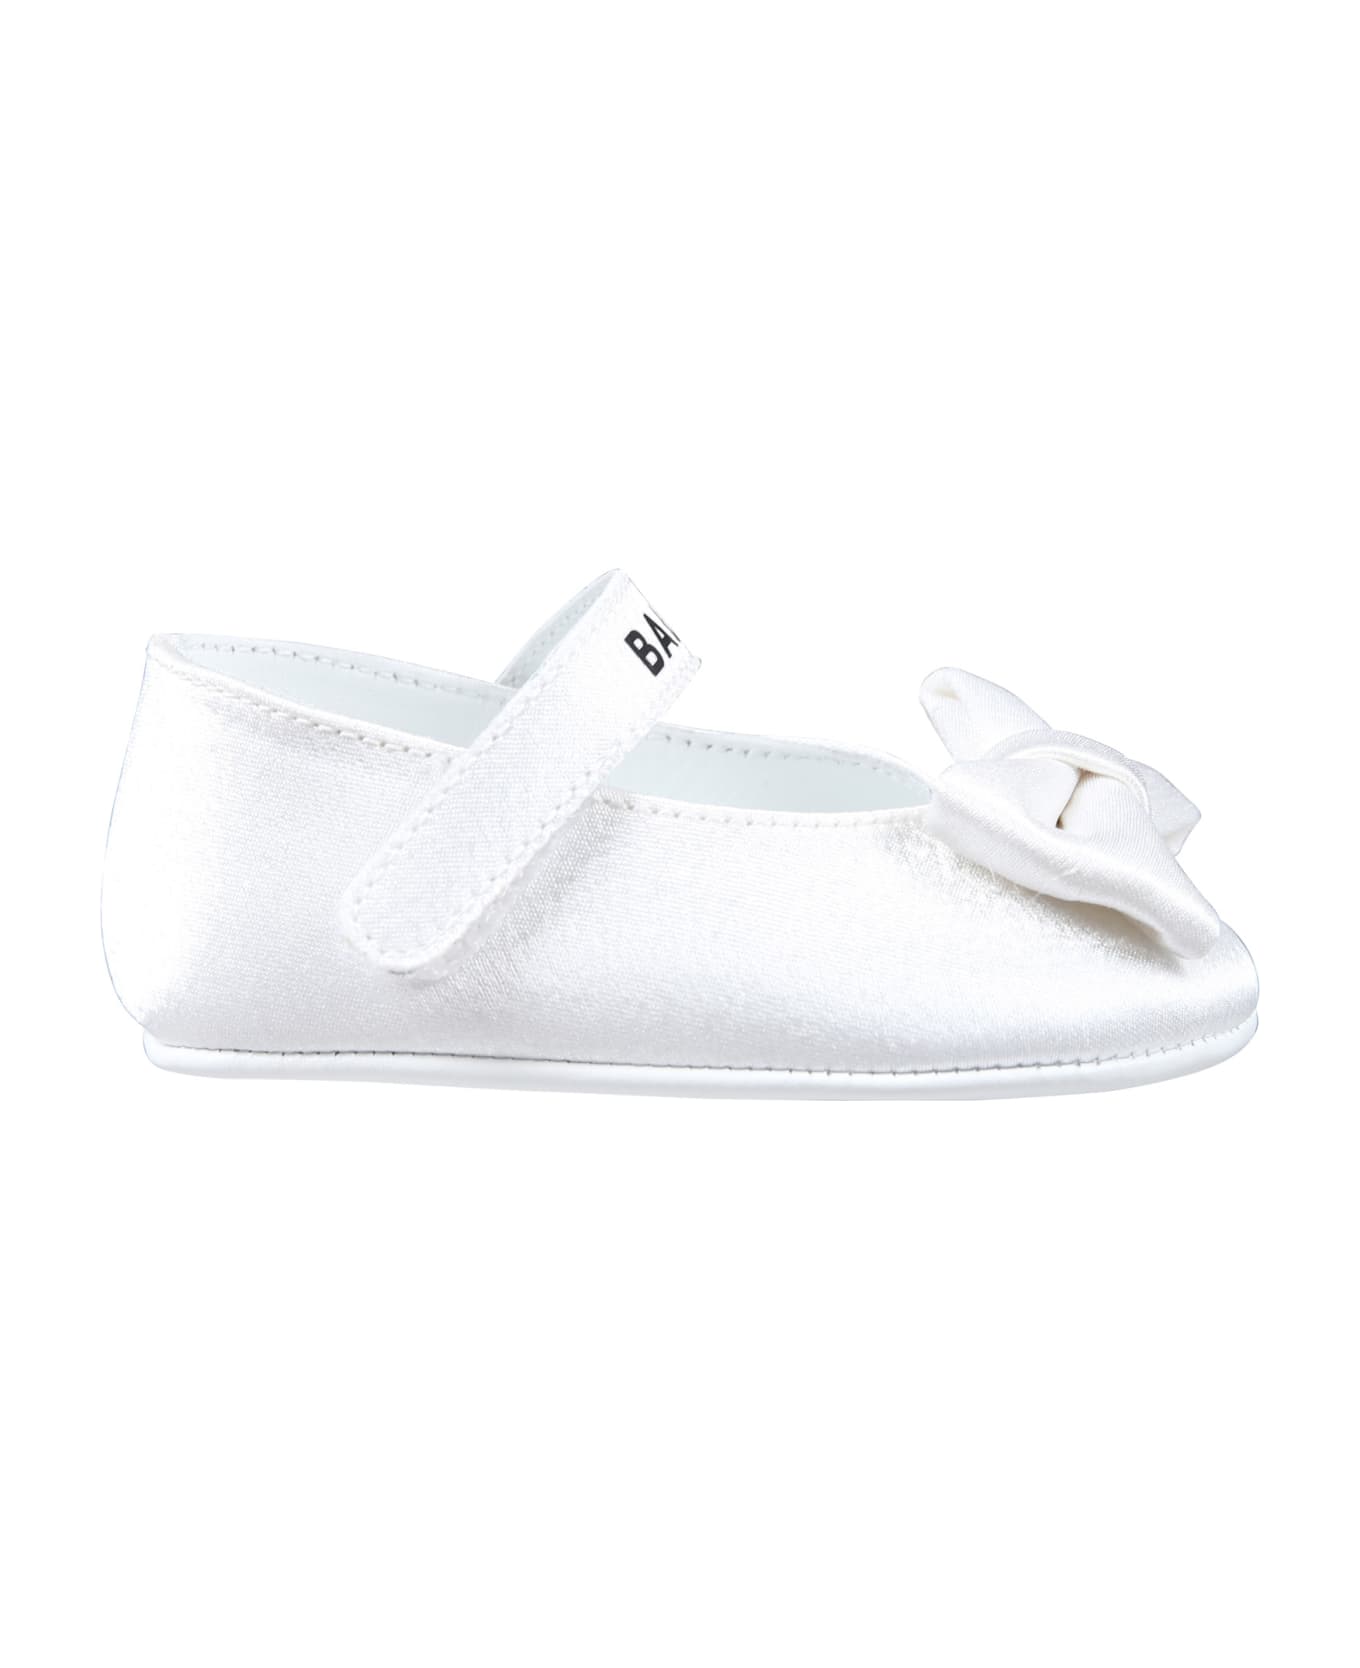 Balmain White Shoes For Baby Girl With Logo And Bow - White シューズ